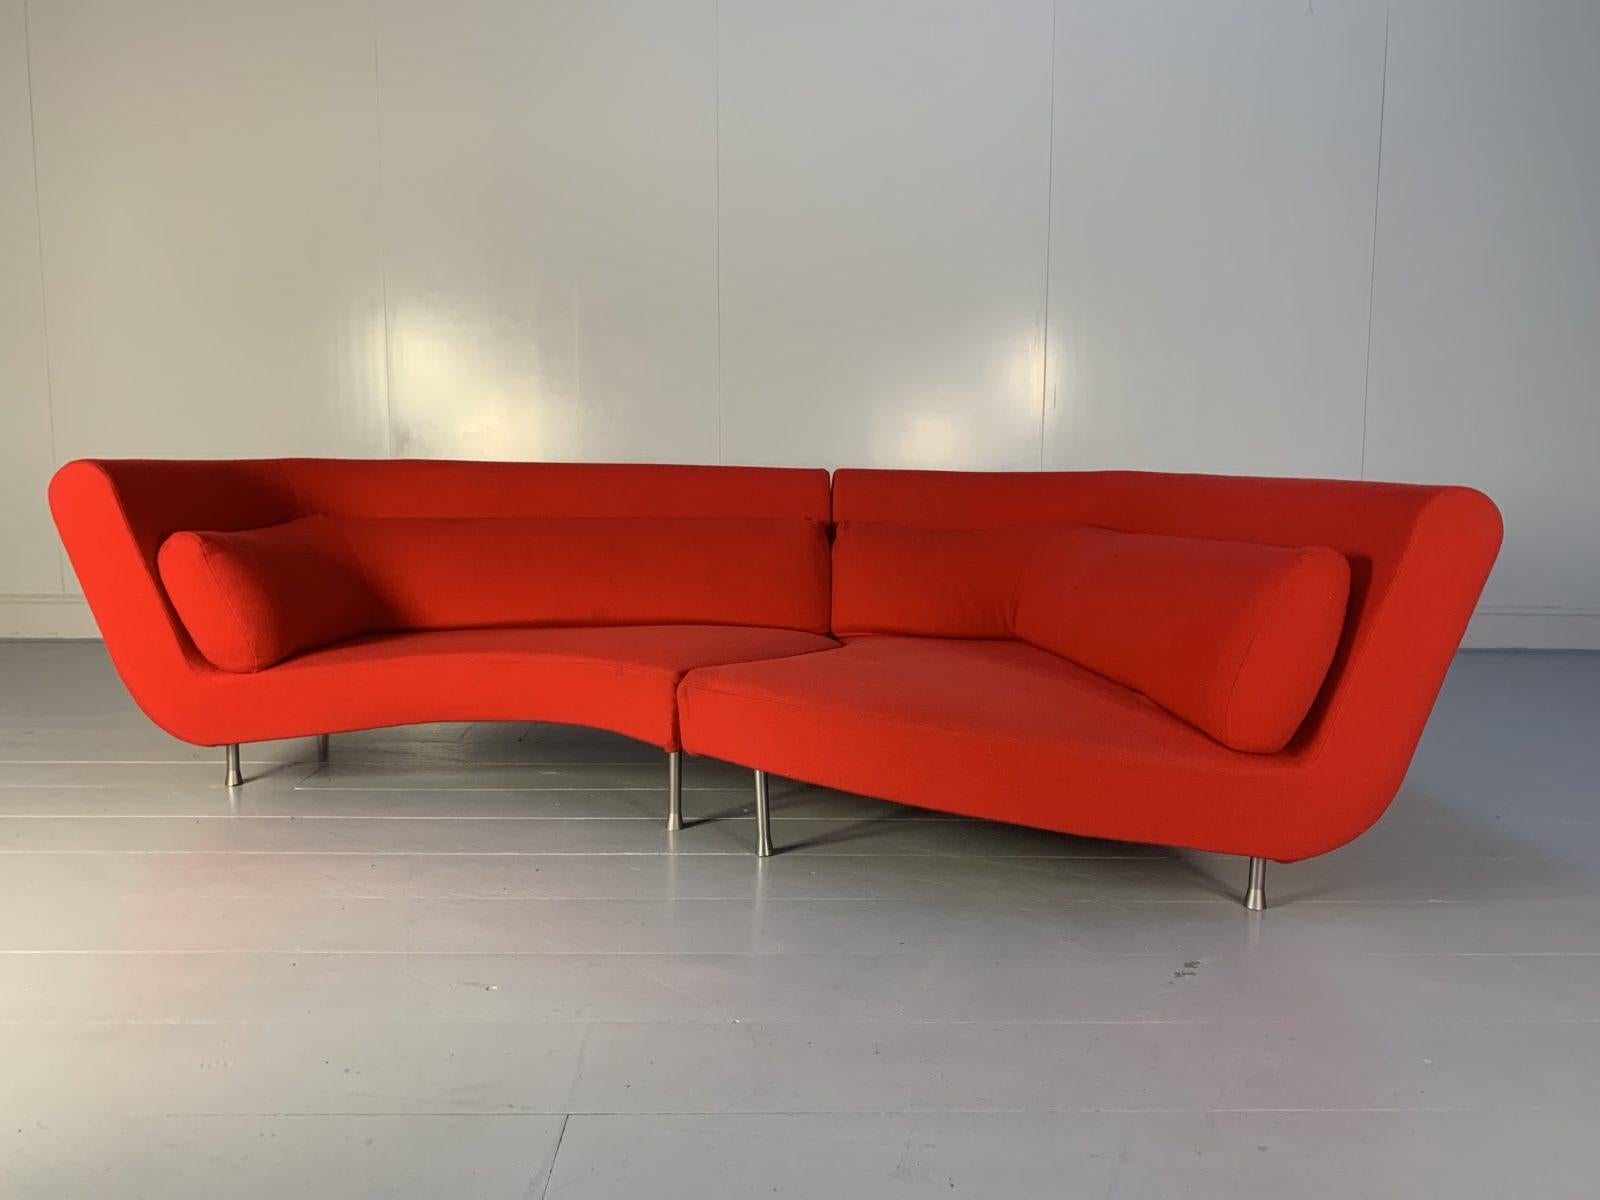 Hello Friends, and welcome to another unmissable offering from Lord Browns Furniture, the UK’s premier resource for fine Sofas and Chairs.

On offer on this occasion is a superb, original Ligne Roset “Yang” Large 4-Seat L-Shape, Sectional Sofa,